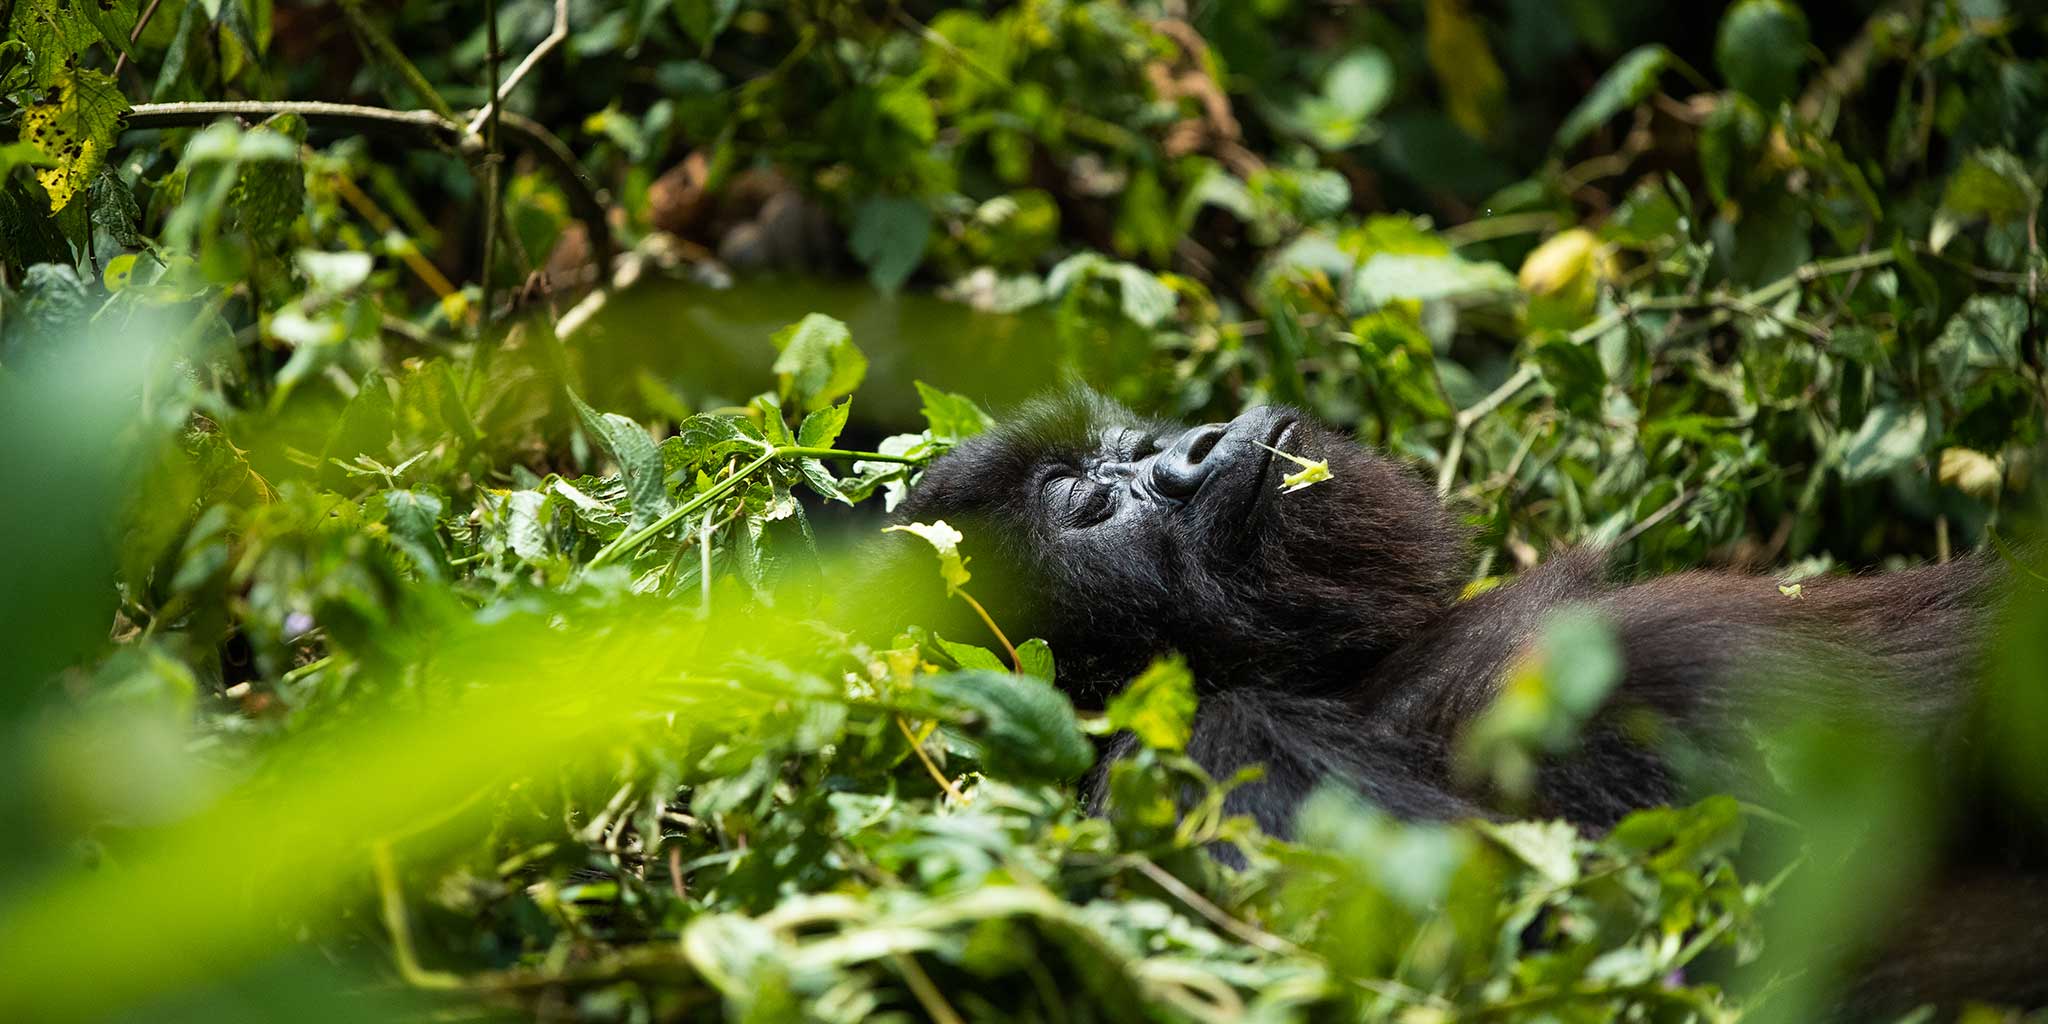 Africa’s great apes await in the rainforests of Rwanda